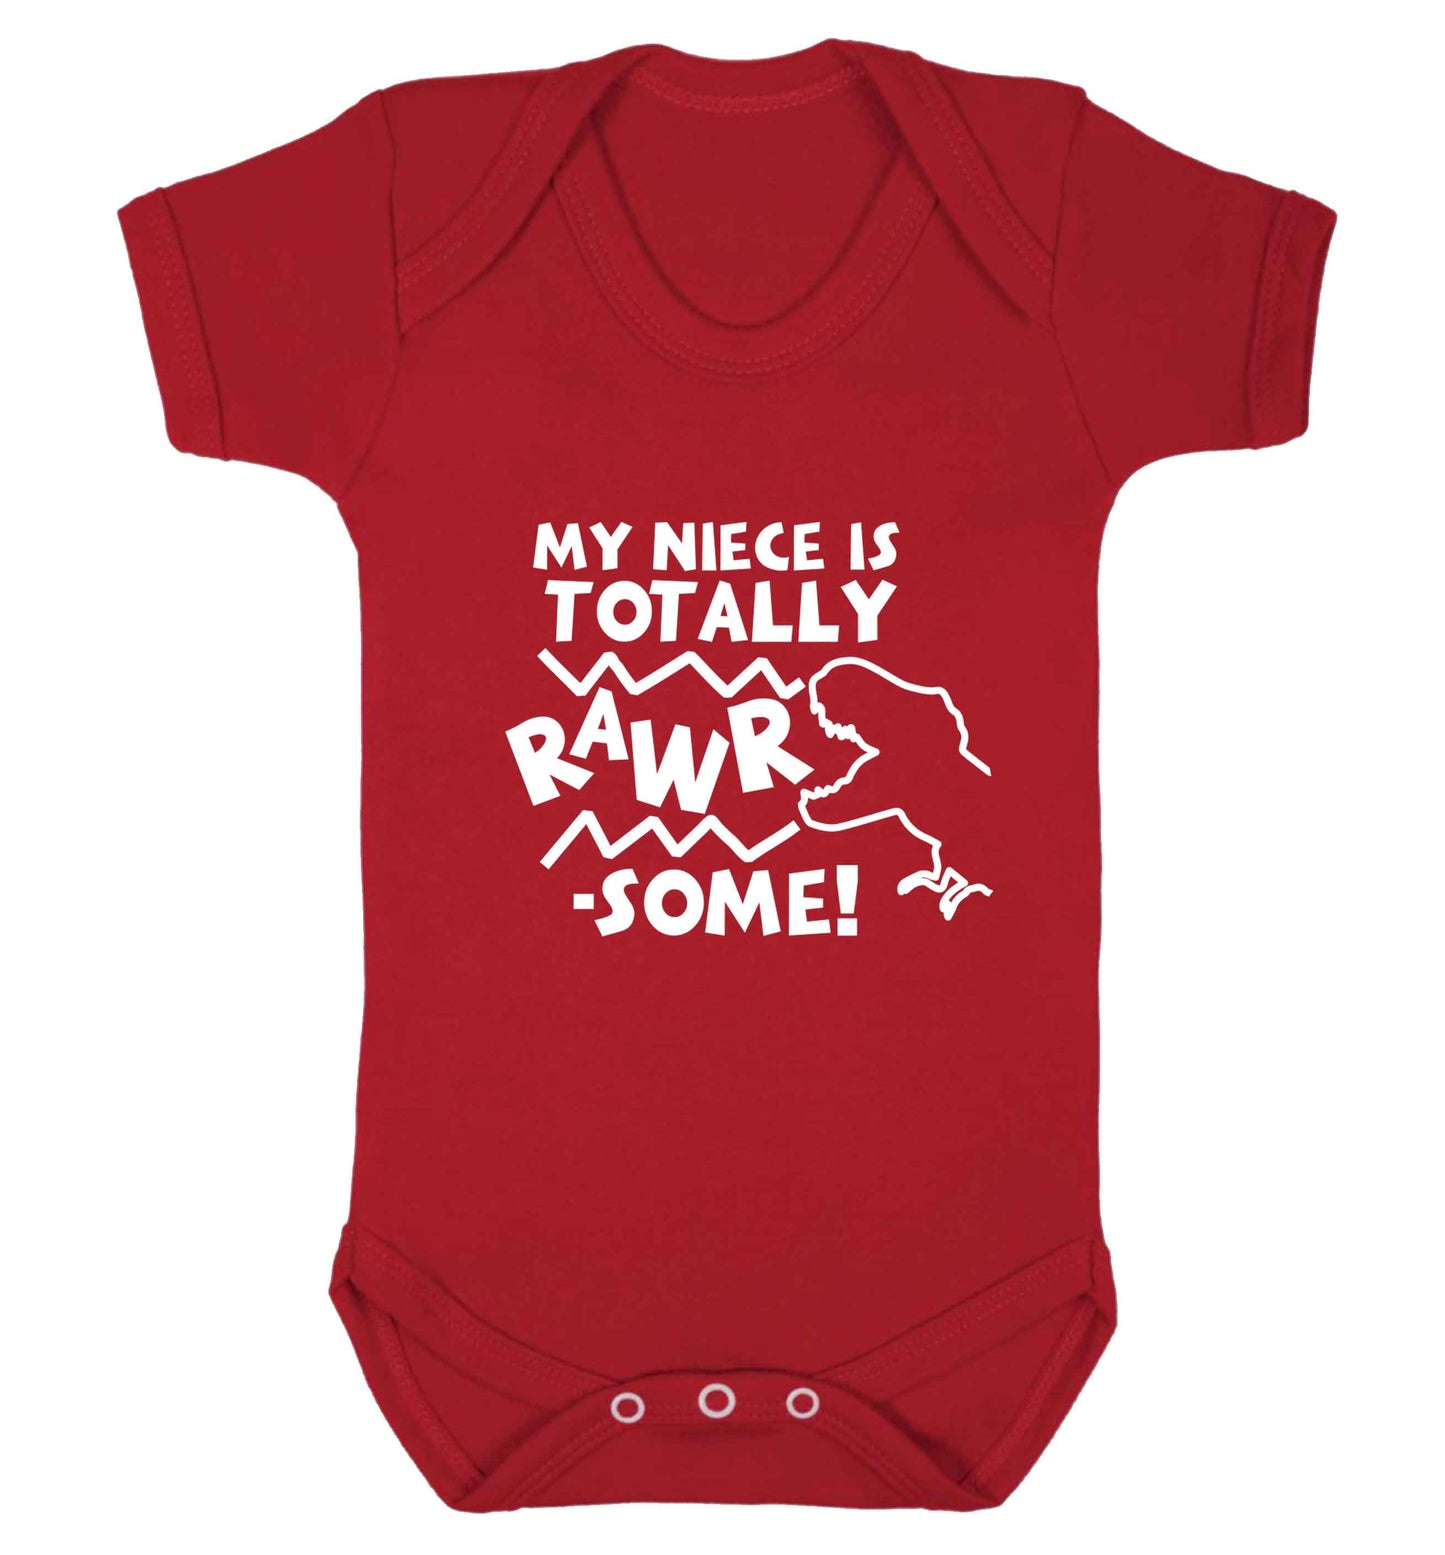 My niece is totally rawrsome baby vest red 18-24 months